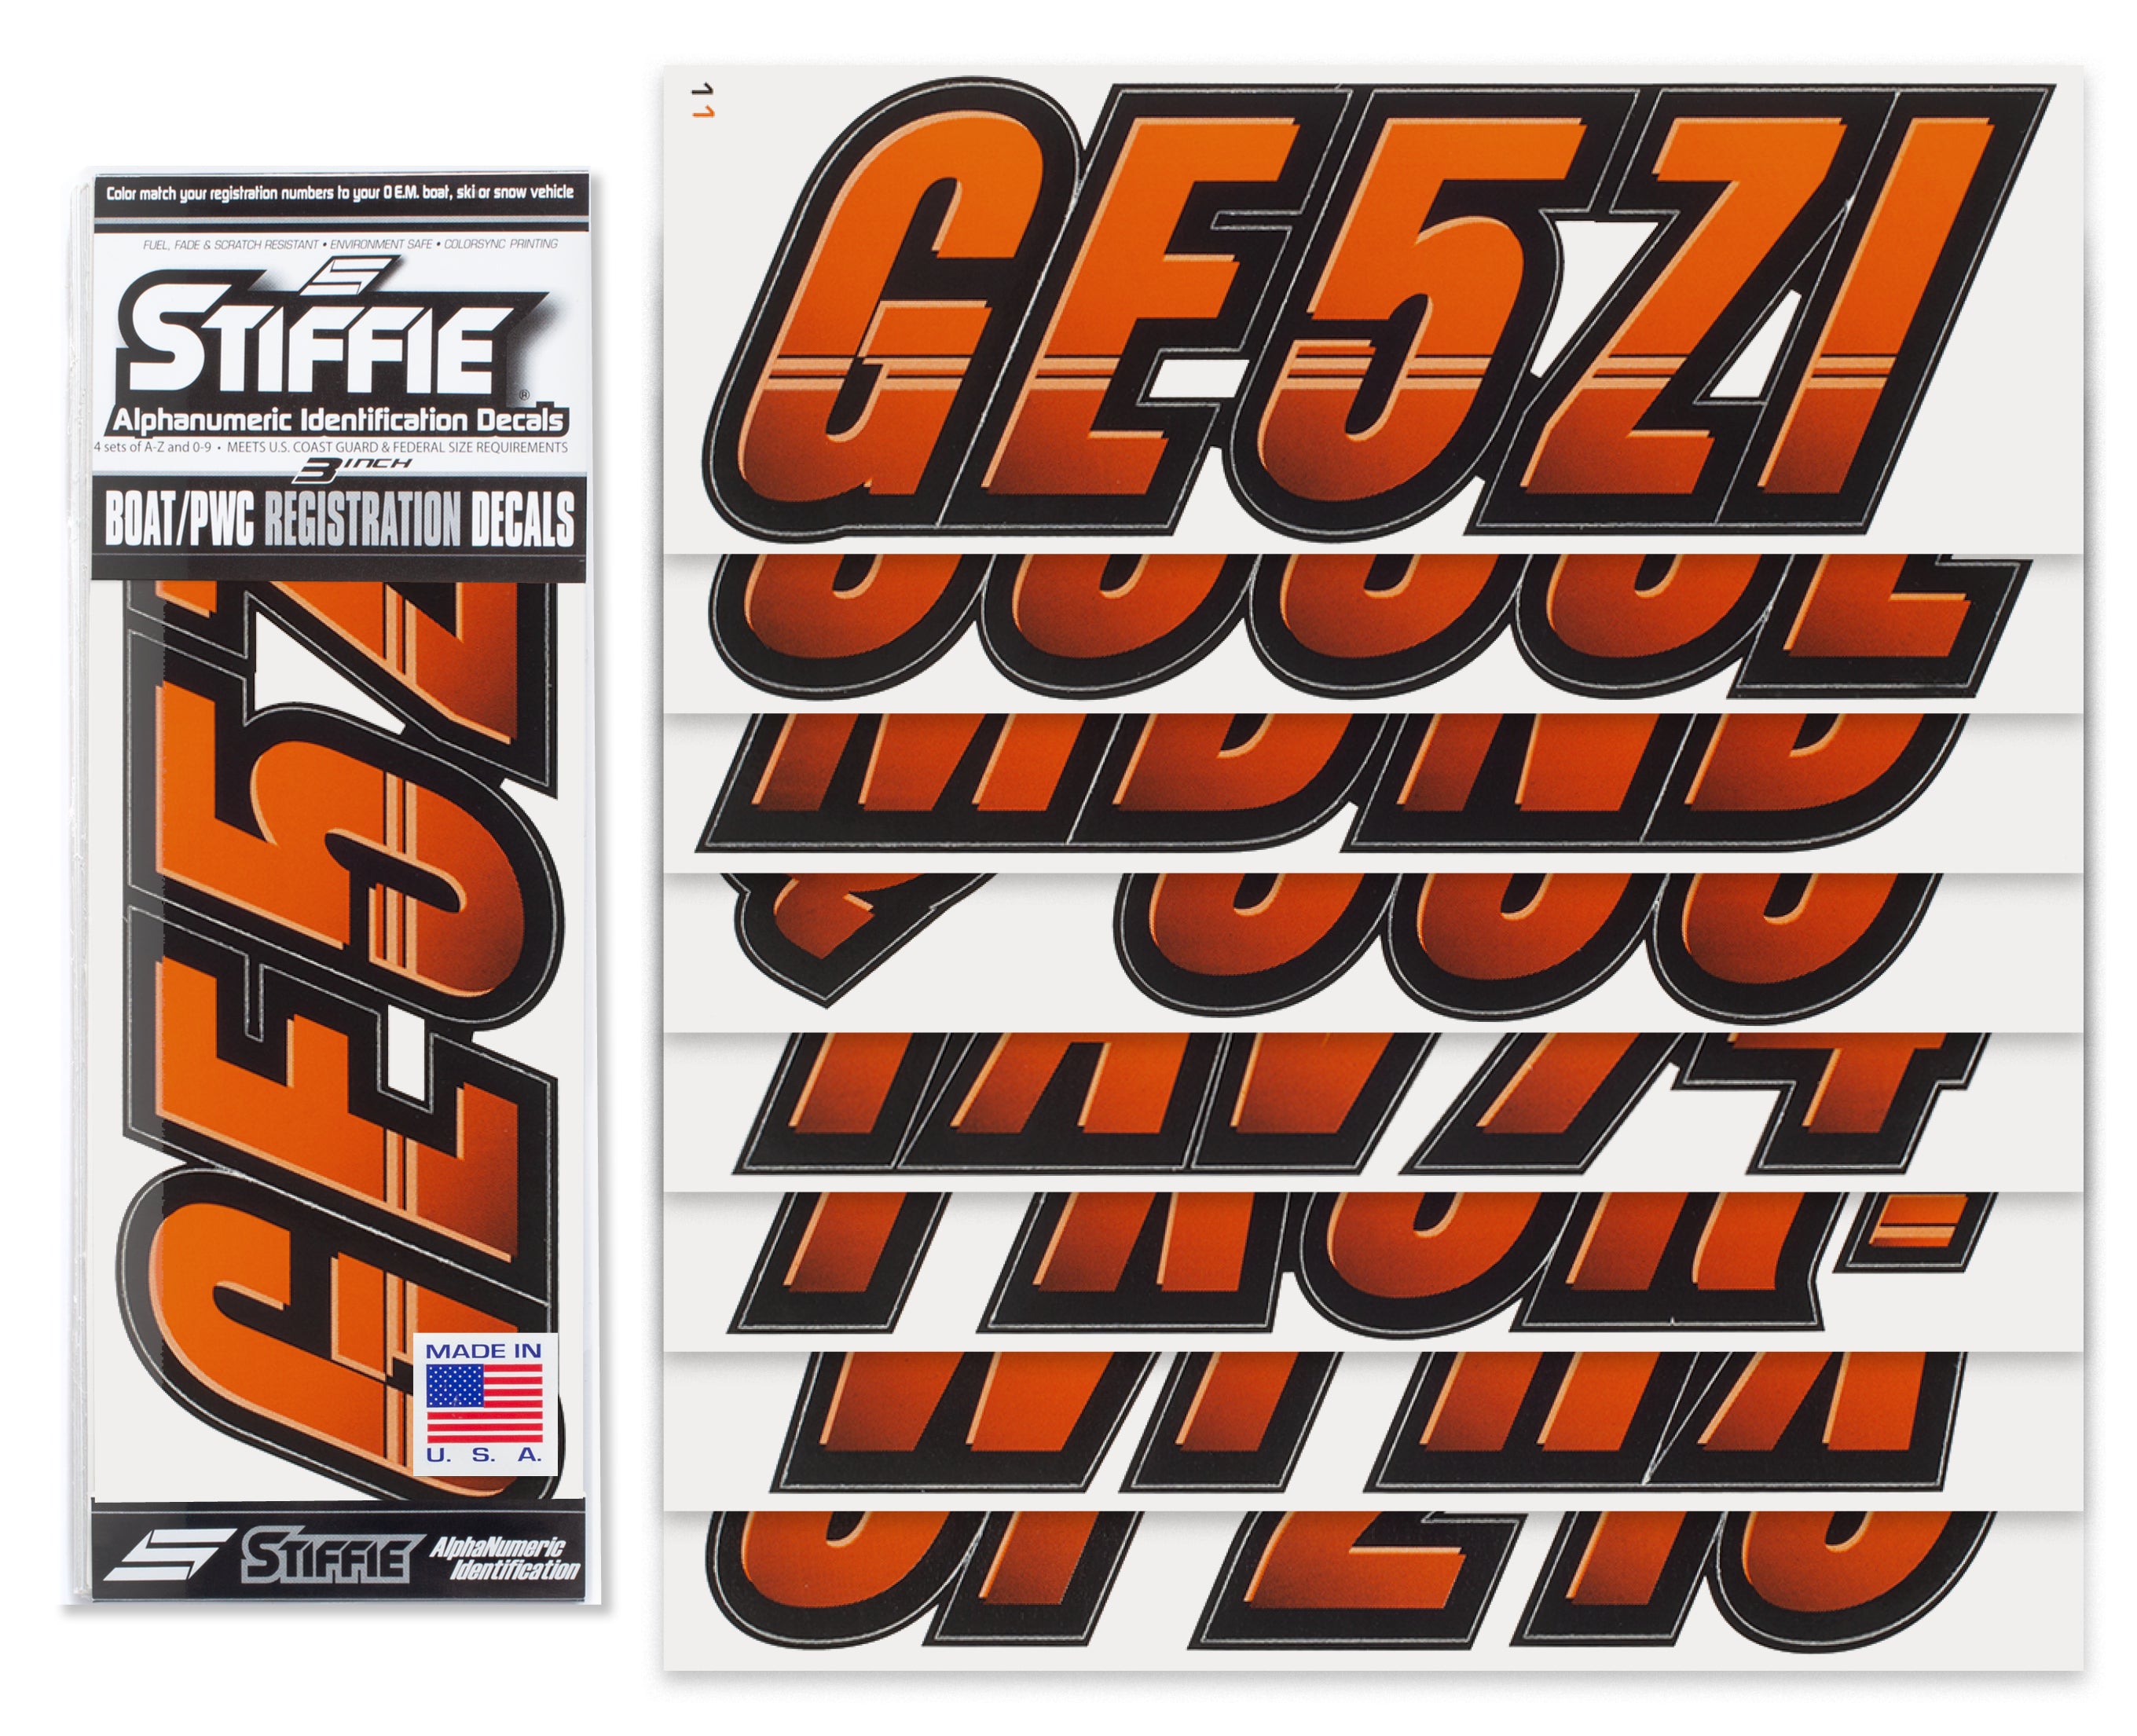 STIFFIE Techtron Orange/Black 3" Alpha-Numeric Registration Identification Numbers Stickers Decals for Boats & Personal Watercraft